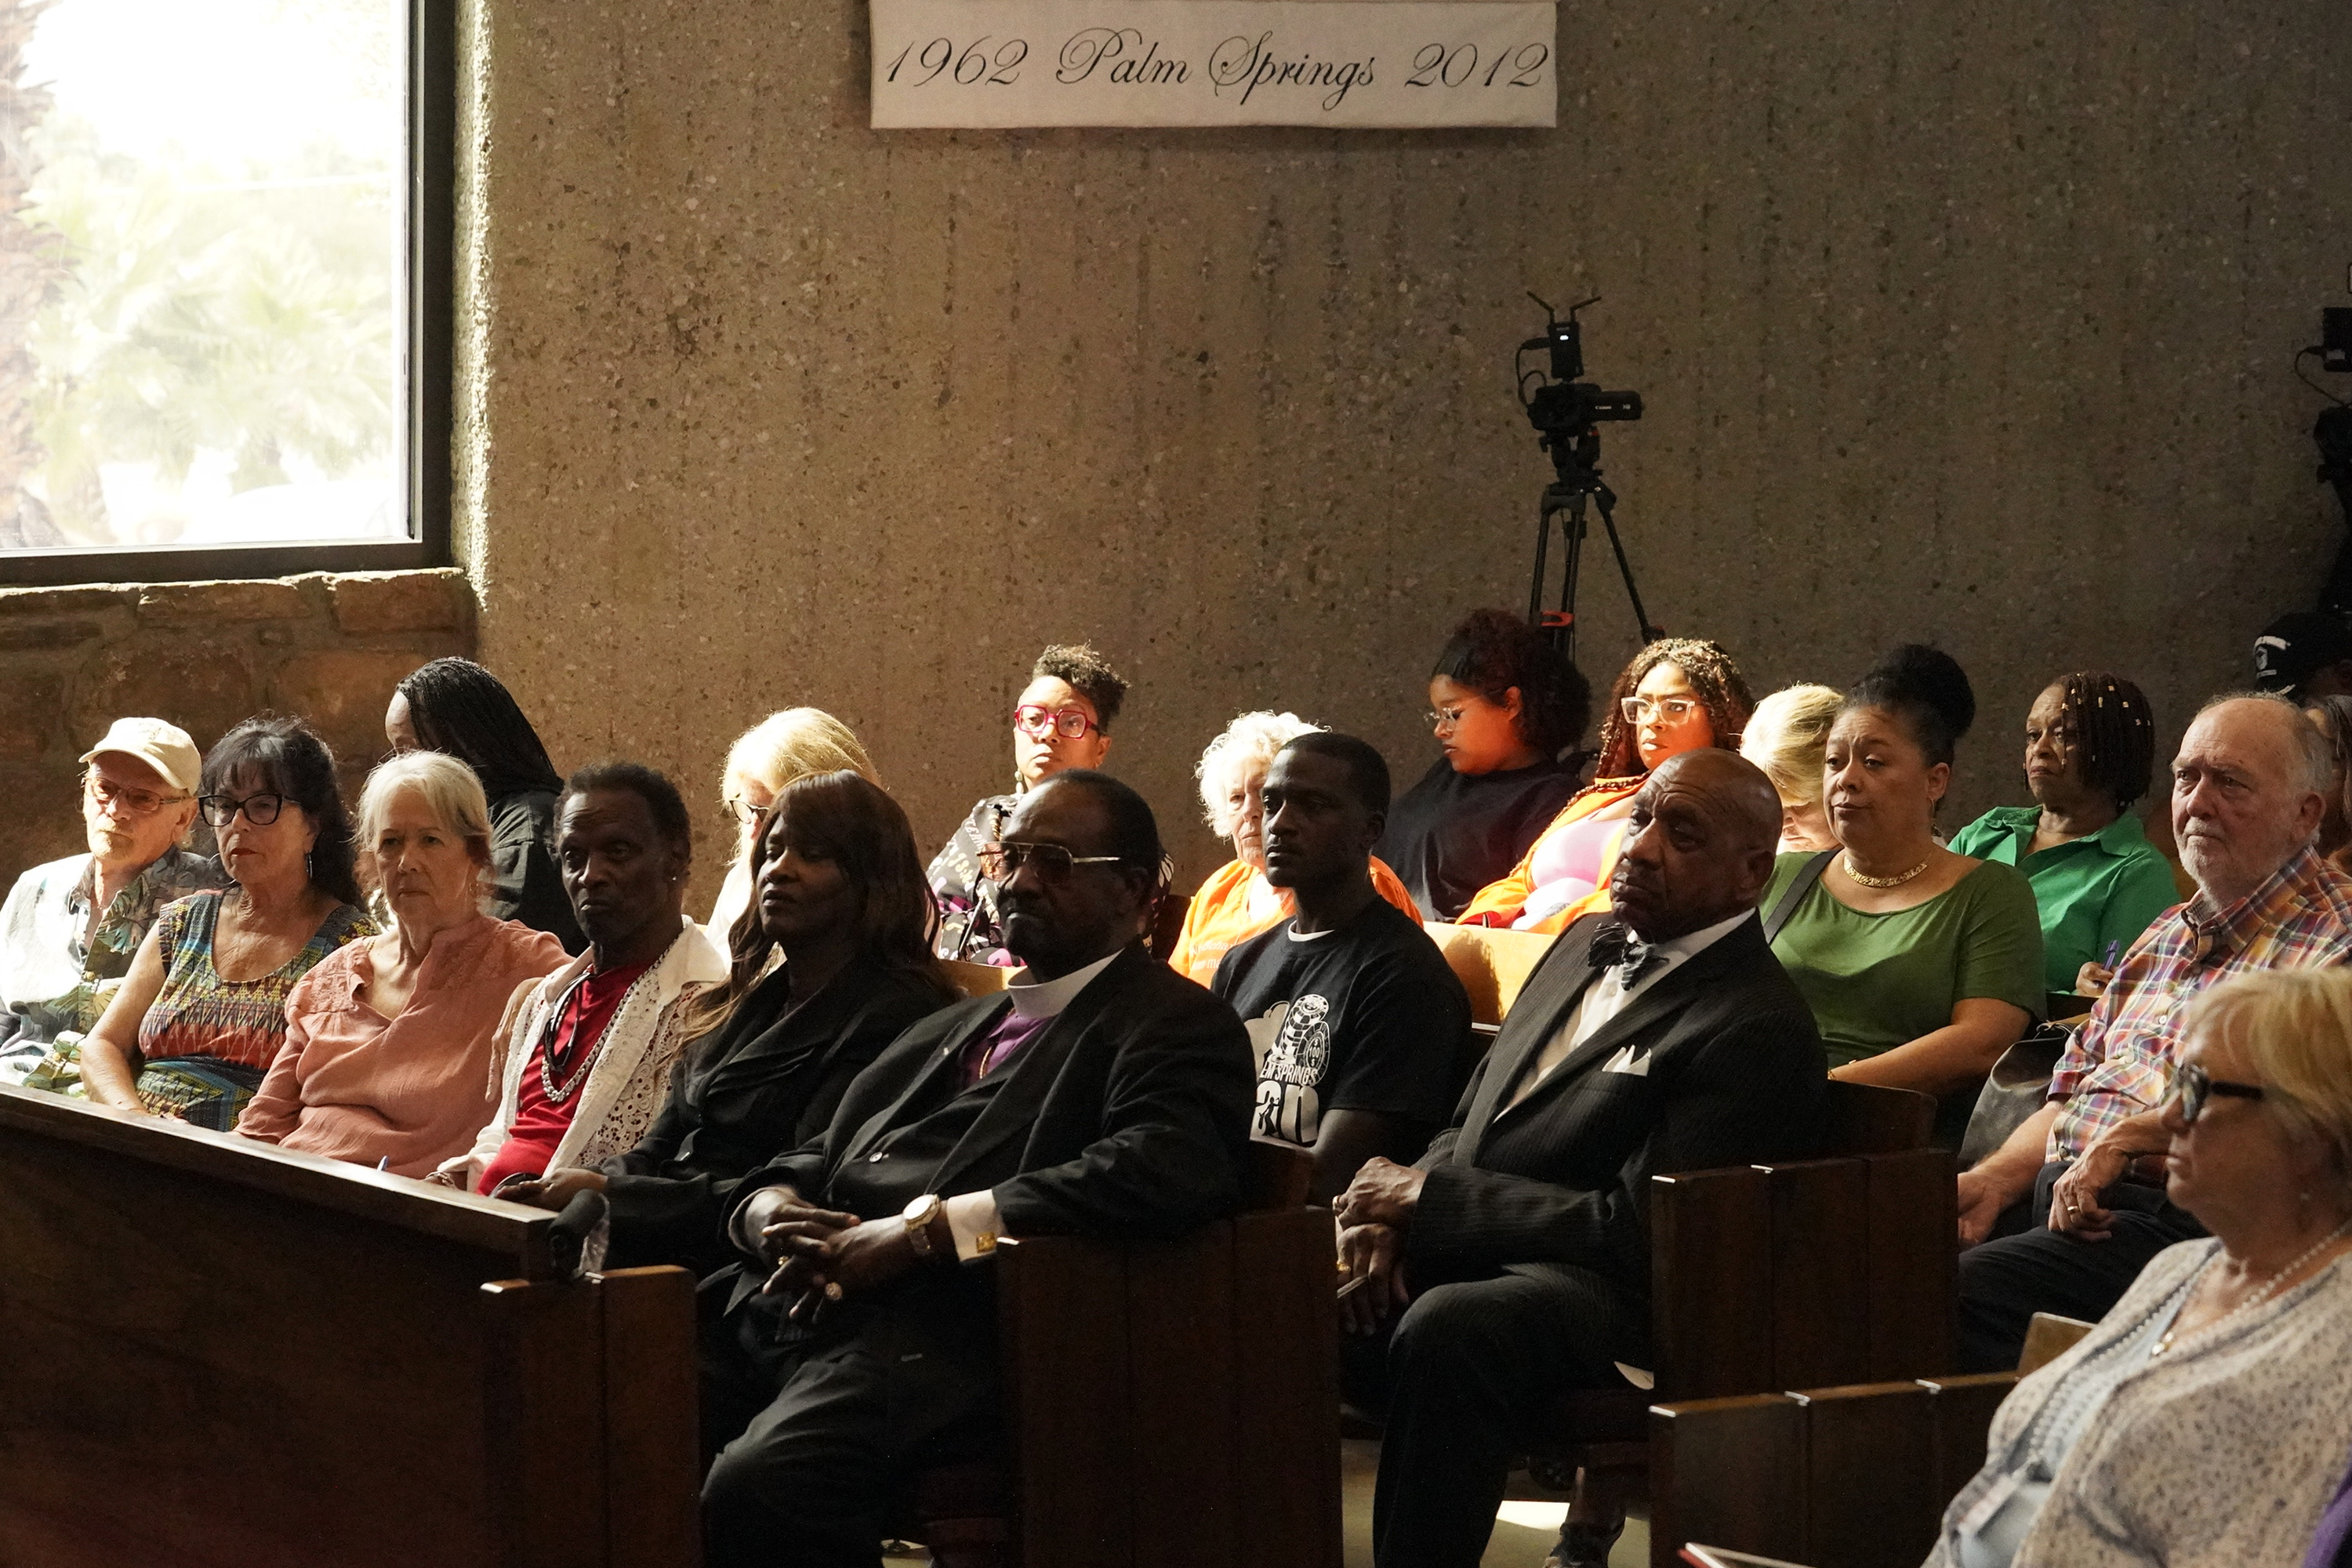 Group of people sitting in a church.